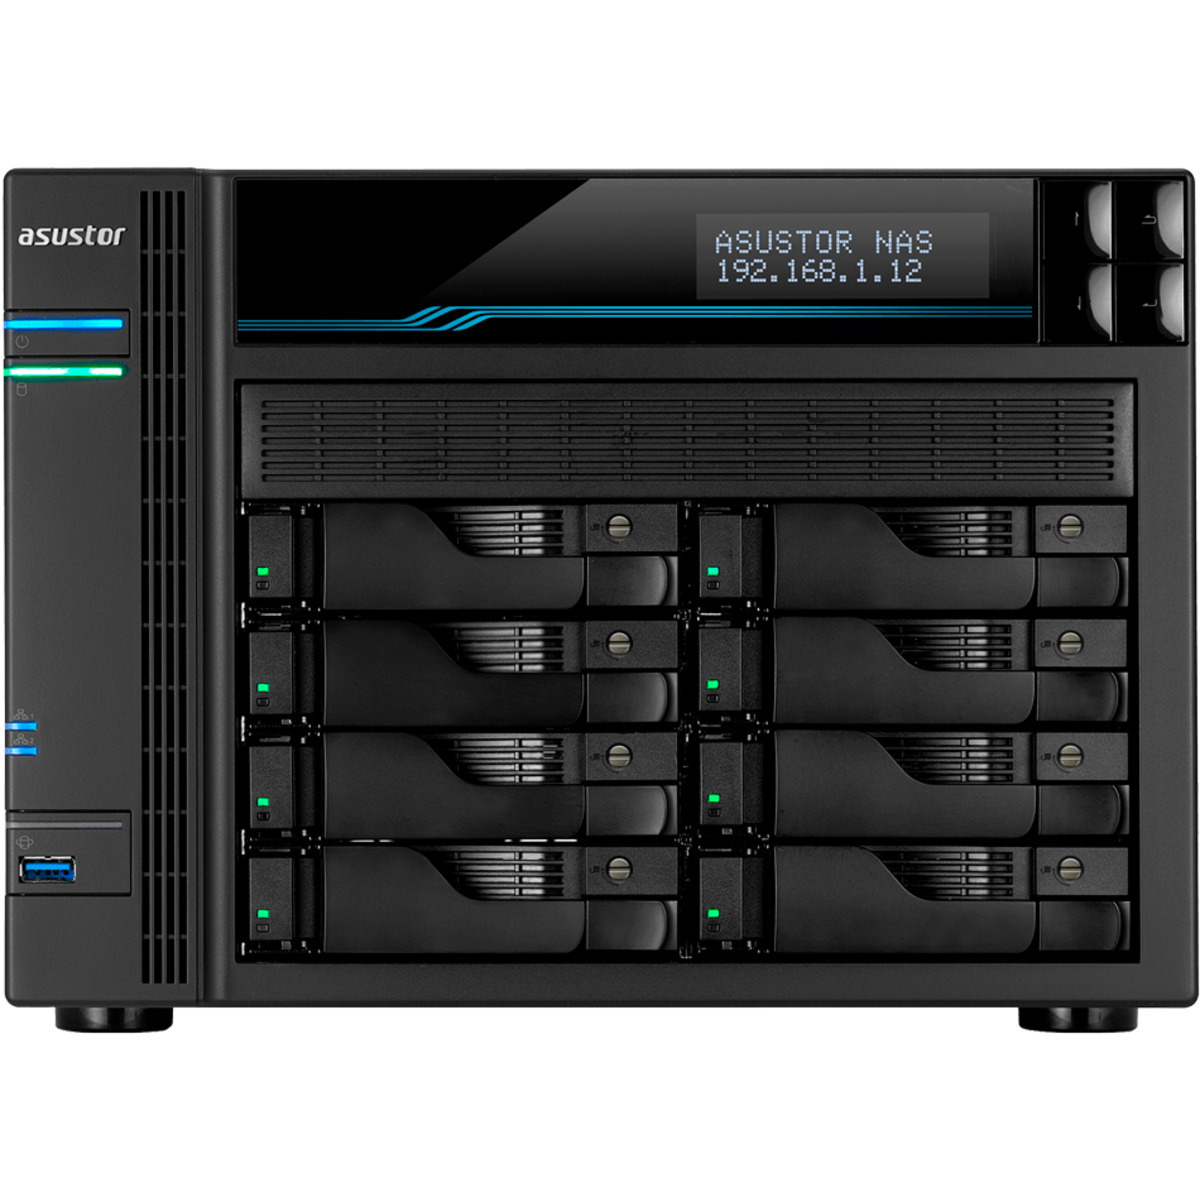 ASUSTOR AS6508T Lockerstor 8 64tb 8-Bay Desktop Multimedia / Power User / Business NAS - Network Attached Storage Device 8x8tb Seagate IronWolf Pro ST8000NT001 3.5 7200rpm SATA 6Gb/s HDD NAS Class Drives Installed - Burn-In Tested - ON SALE - FREE RAM UPGRADE AS6508T Lockerstor 8